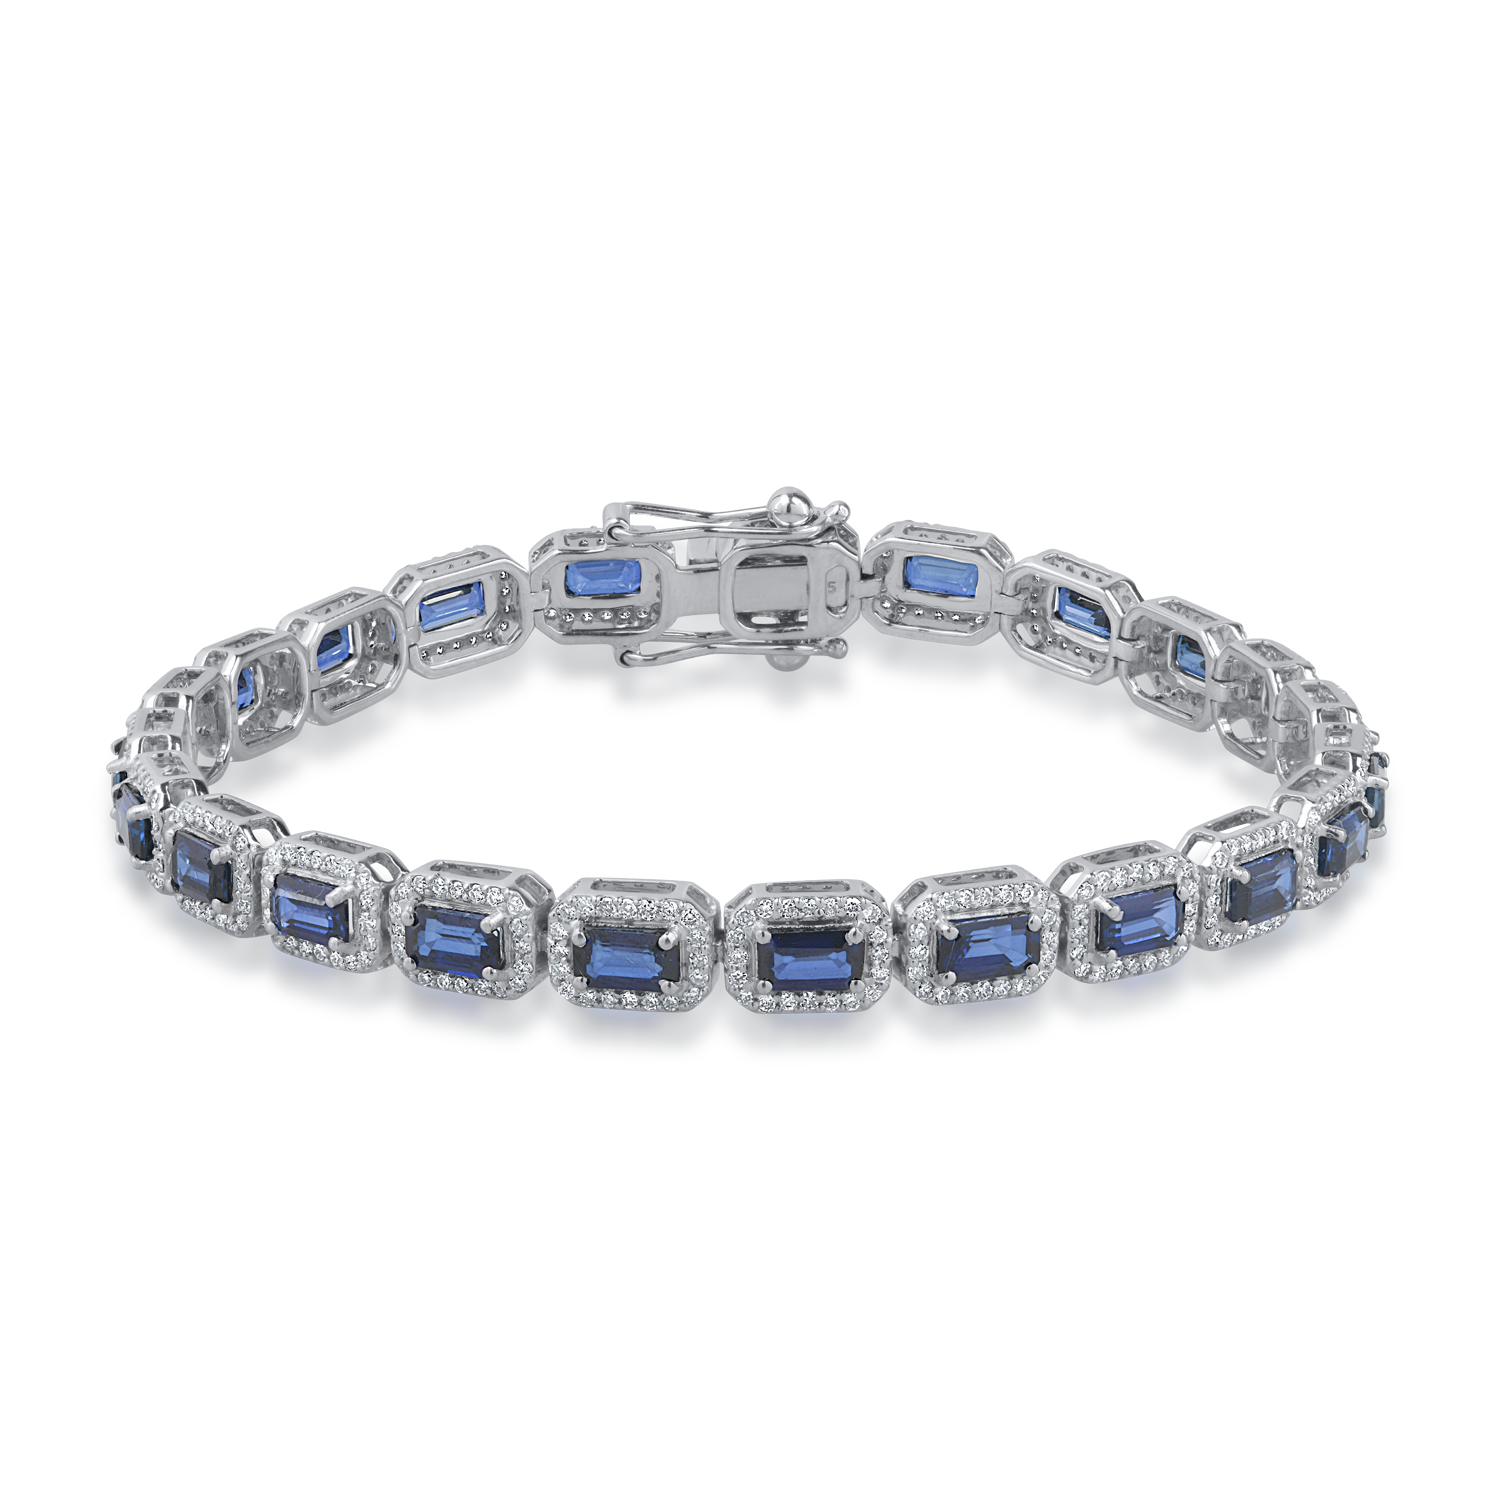 White gold tennis bracelet with 6.63ct sapphires and 1.45ct diamonds